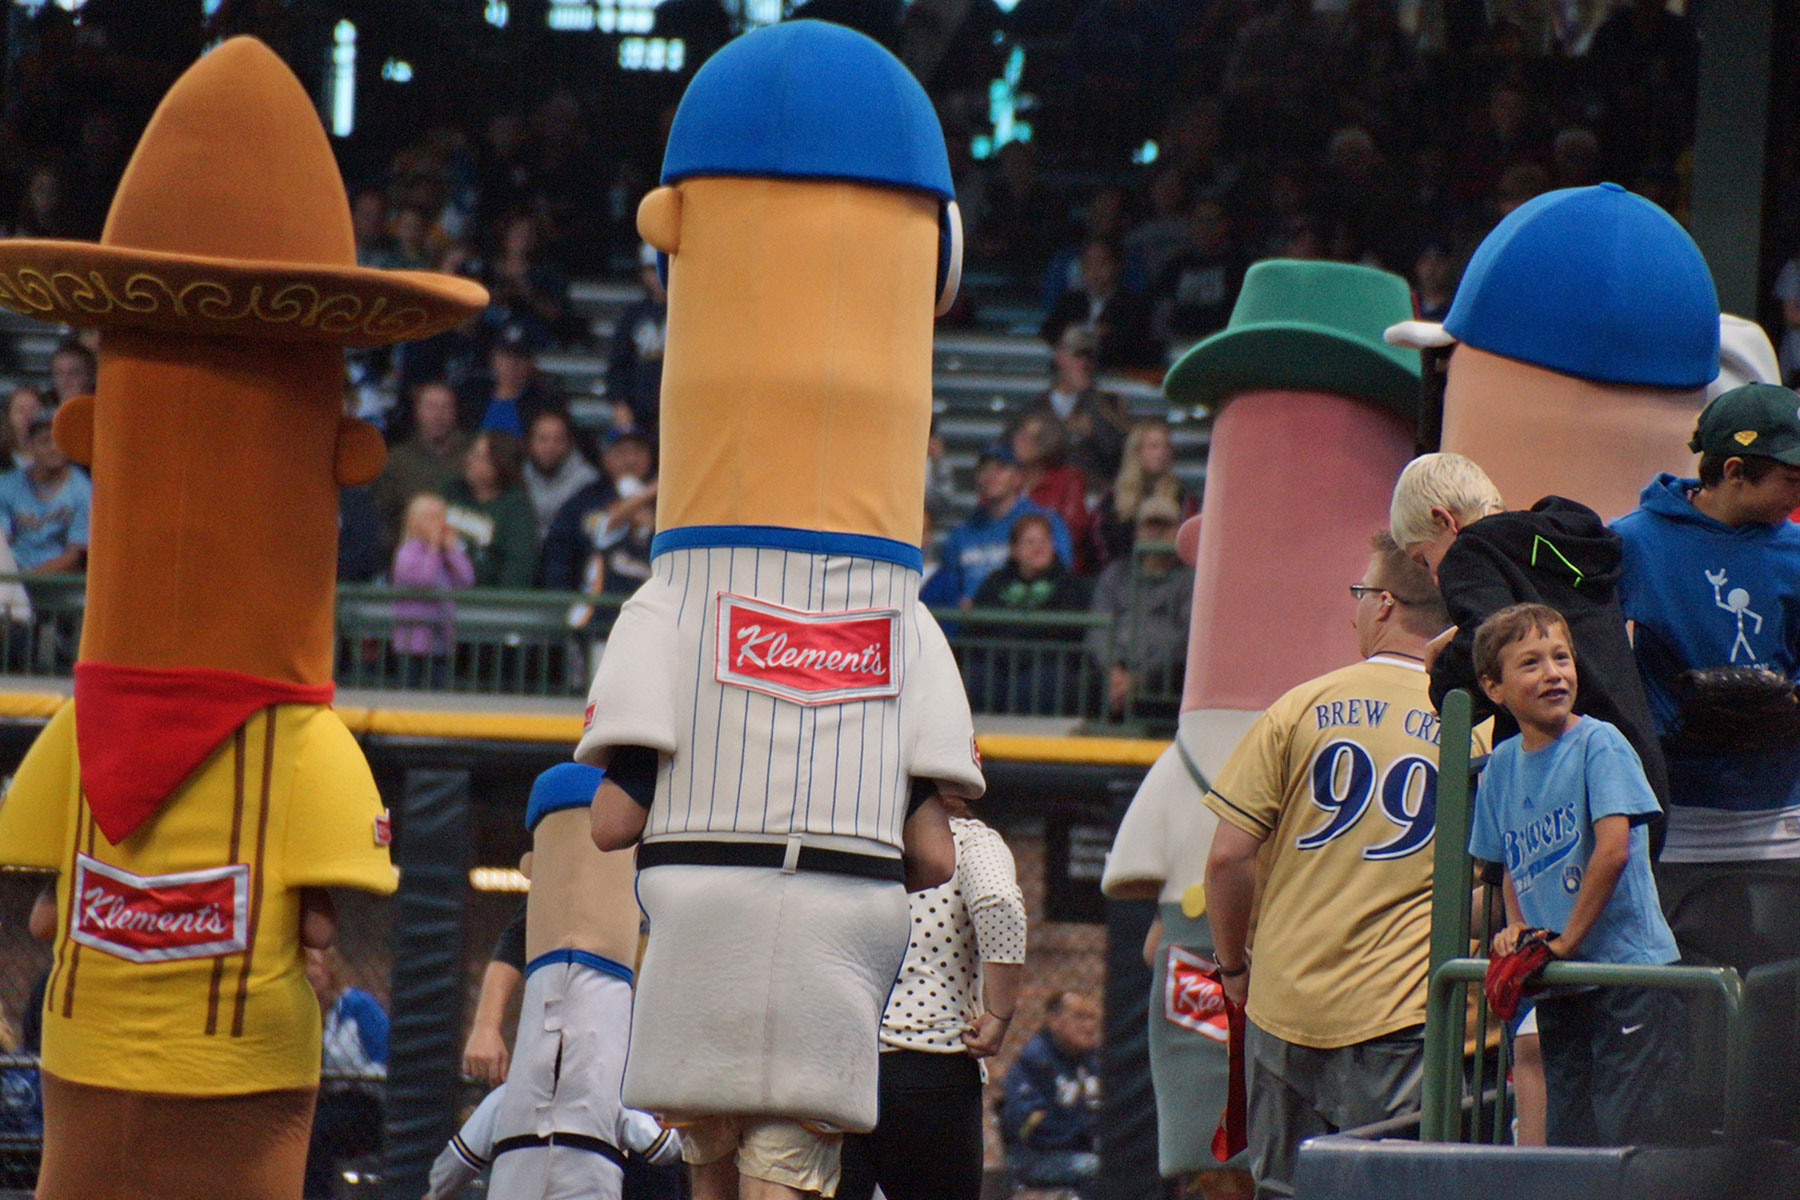 Brewers cut link to Klements in famed sausage race - Wausau Pilot & Review